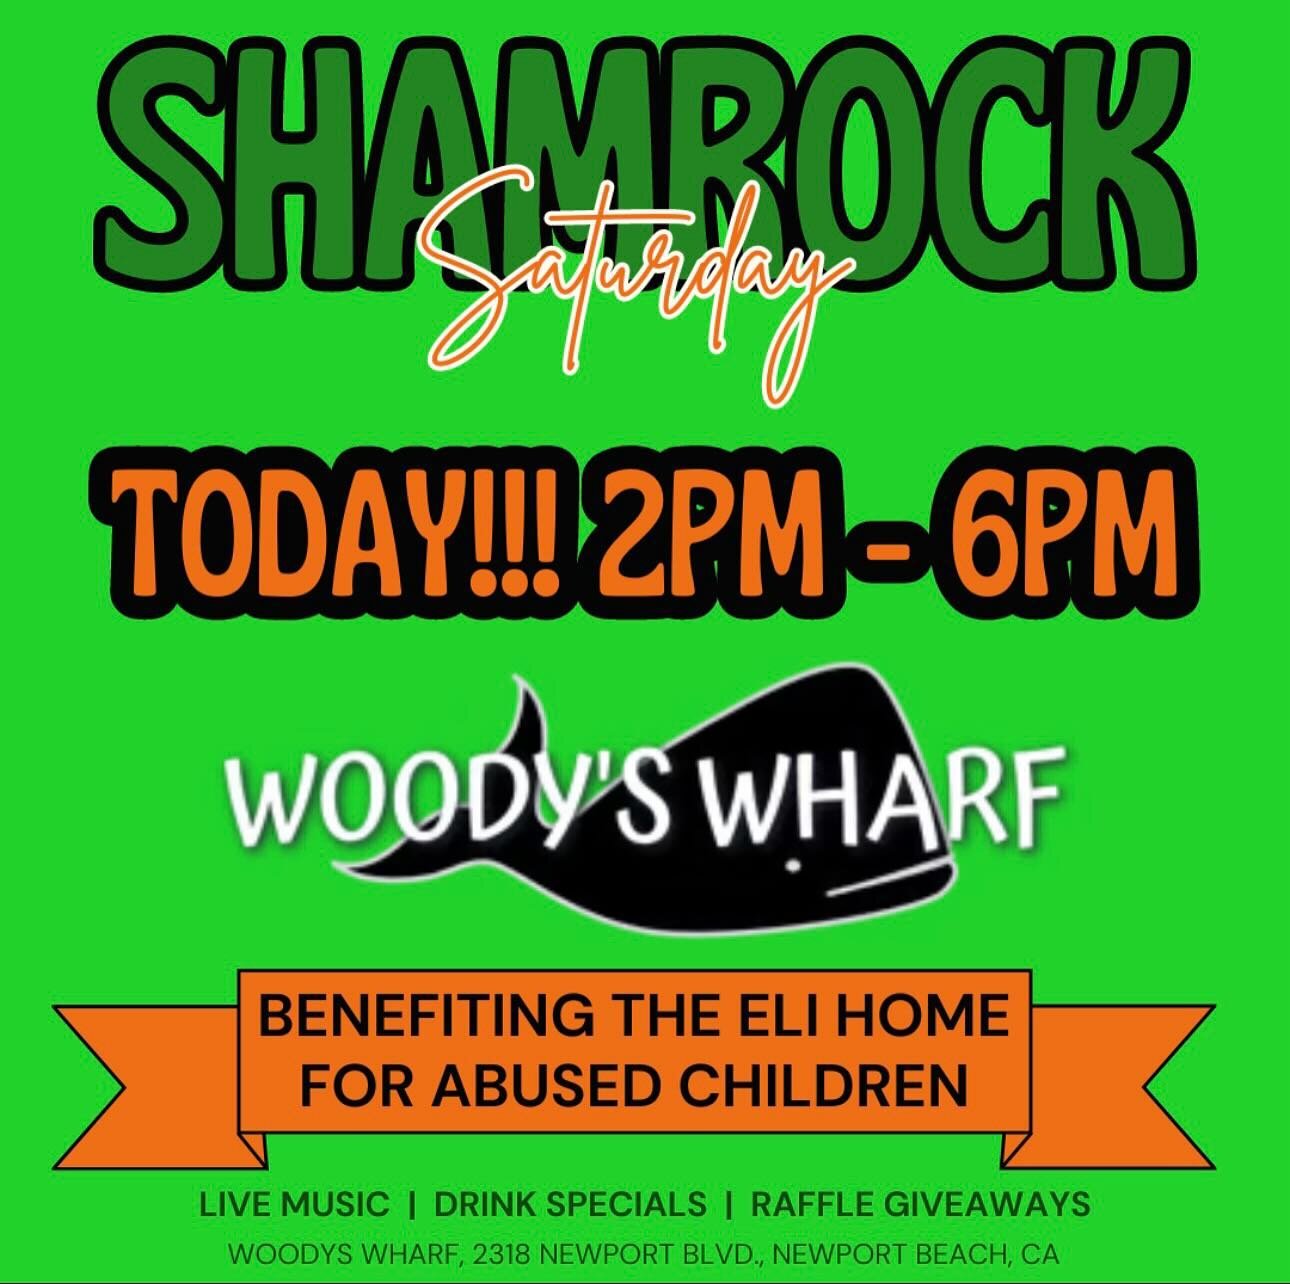 Can&rsquo;t wait to see you all! ⬇️⬇️

🎵 Multiple Live Bands 🎵 
🎁 Raffle Prizes 🎁 
🍸 Drink Specials 🍸 
💰 50/50 Drawing 💰 
☘️ St. Patrick&rsquo;s Day Merch ☘️ 

@woodysnewport 
@woodyswharfnightlife 
@theelihome 

#NewportBeach #NewportBeachRe